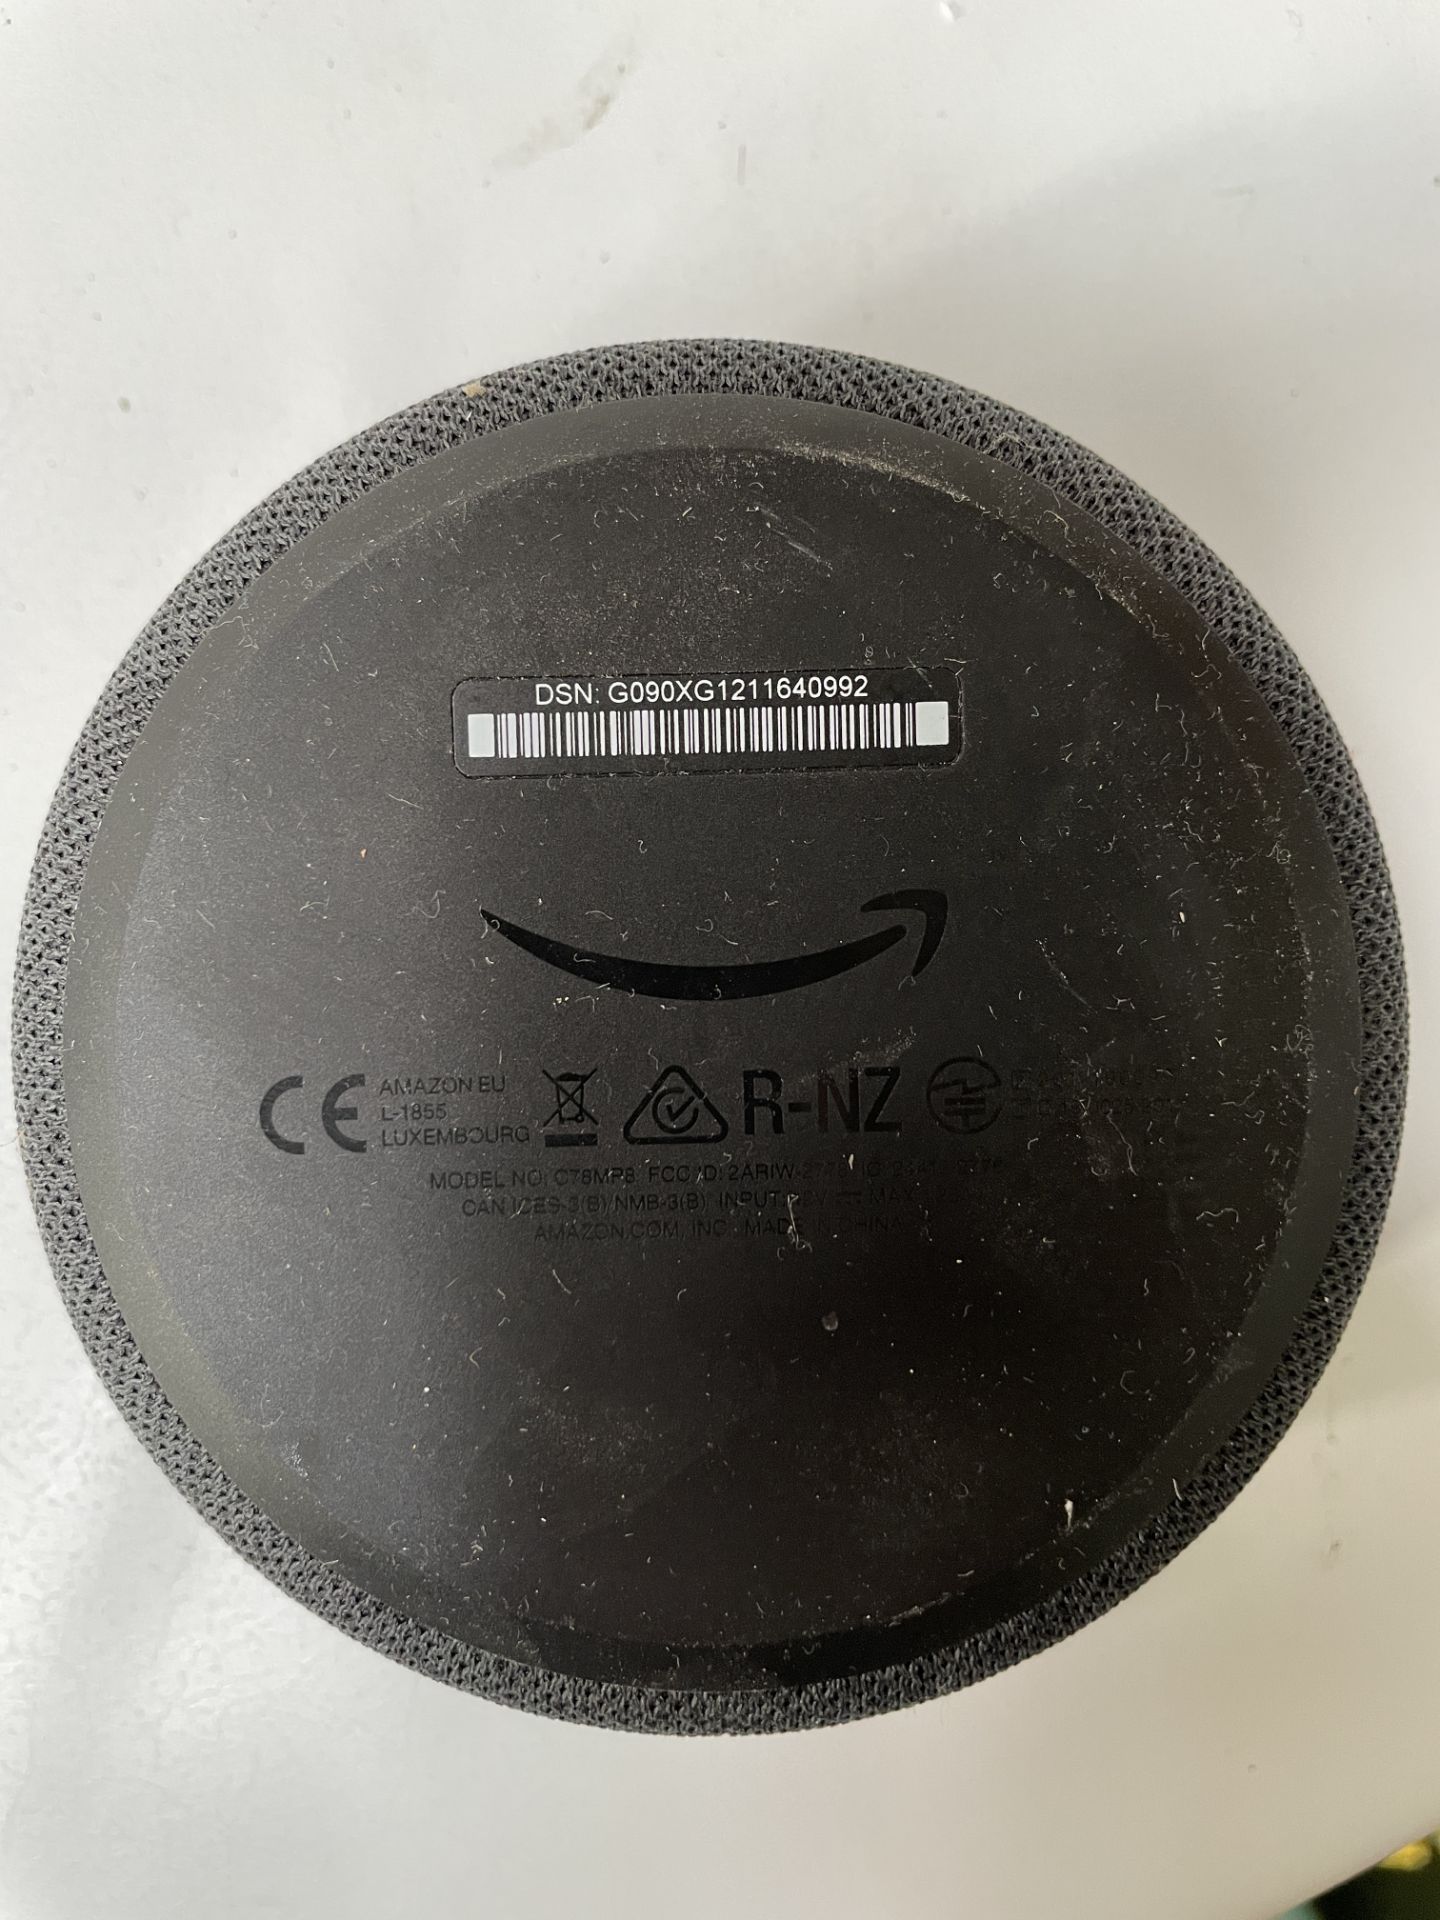 UE Bluetooth Speaker & Amazon Echo Dot (Location Brentwood. Please Refer to General Notes) - Image 5 of 5